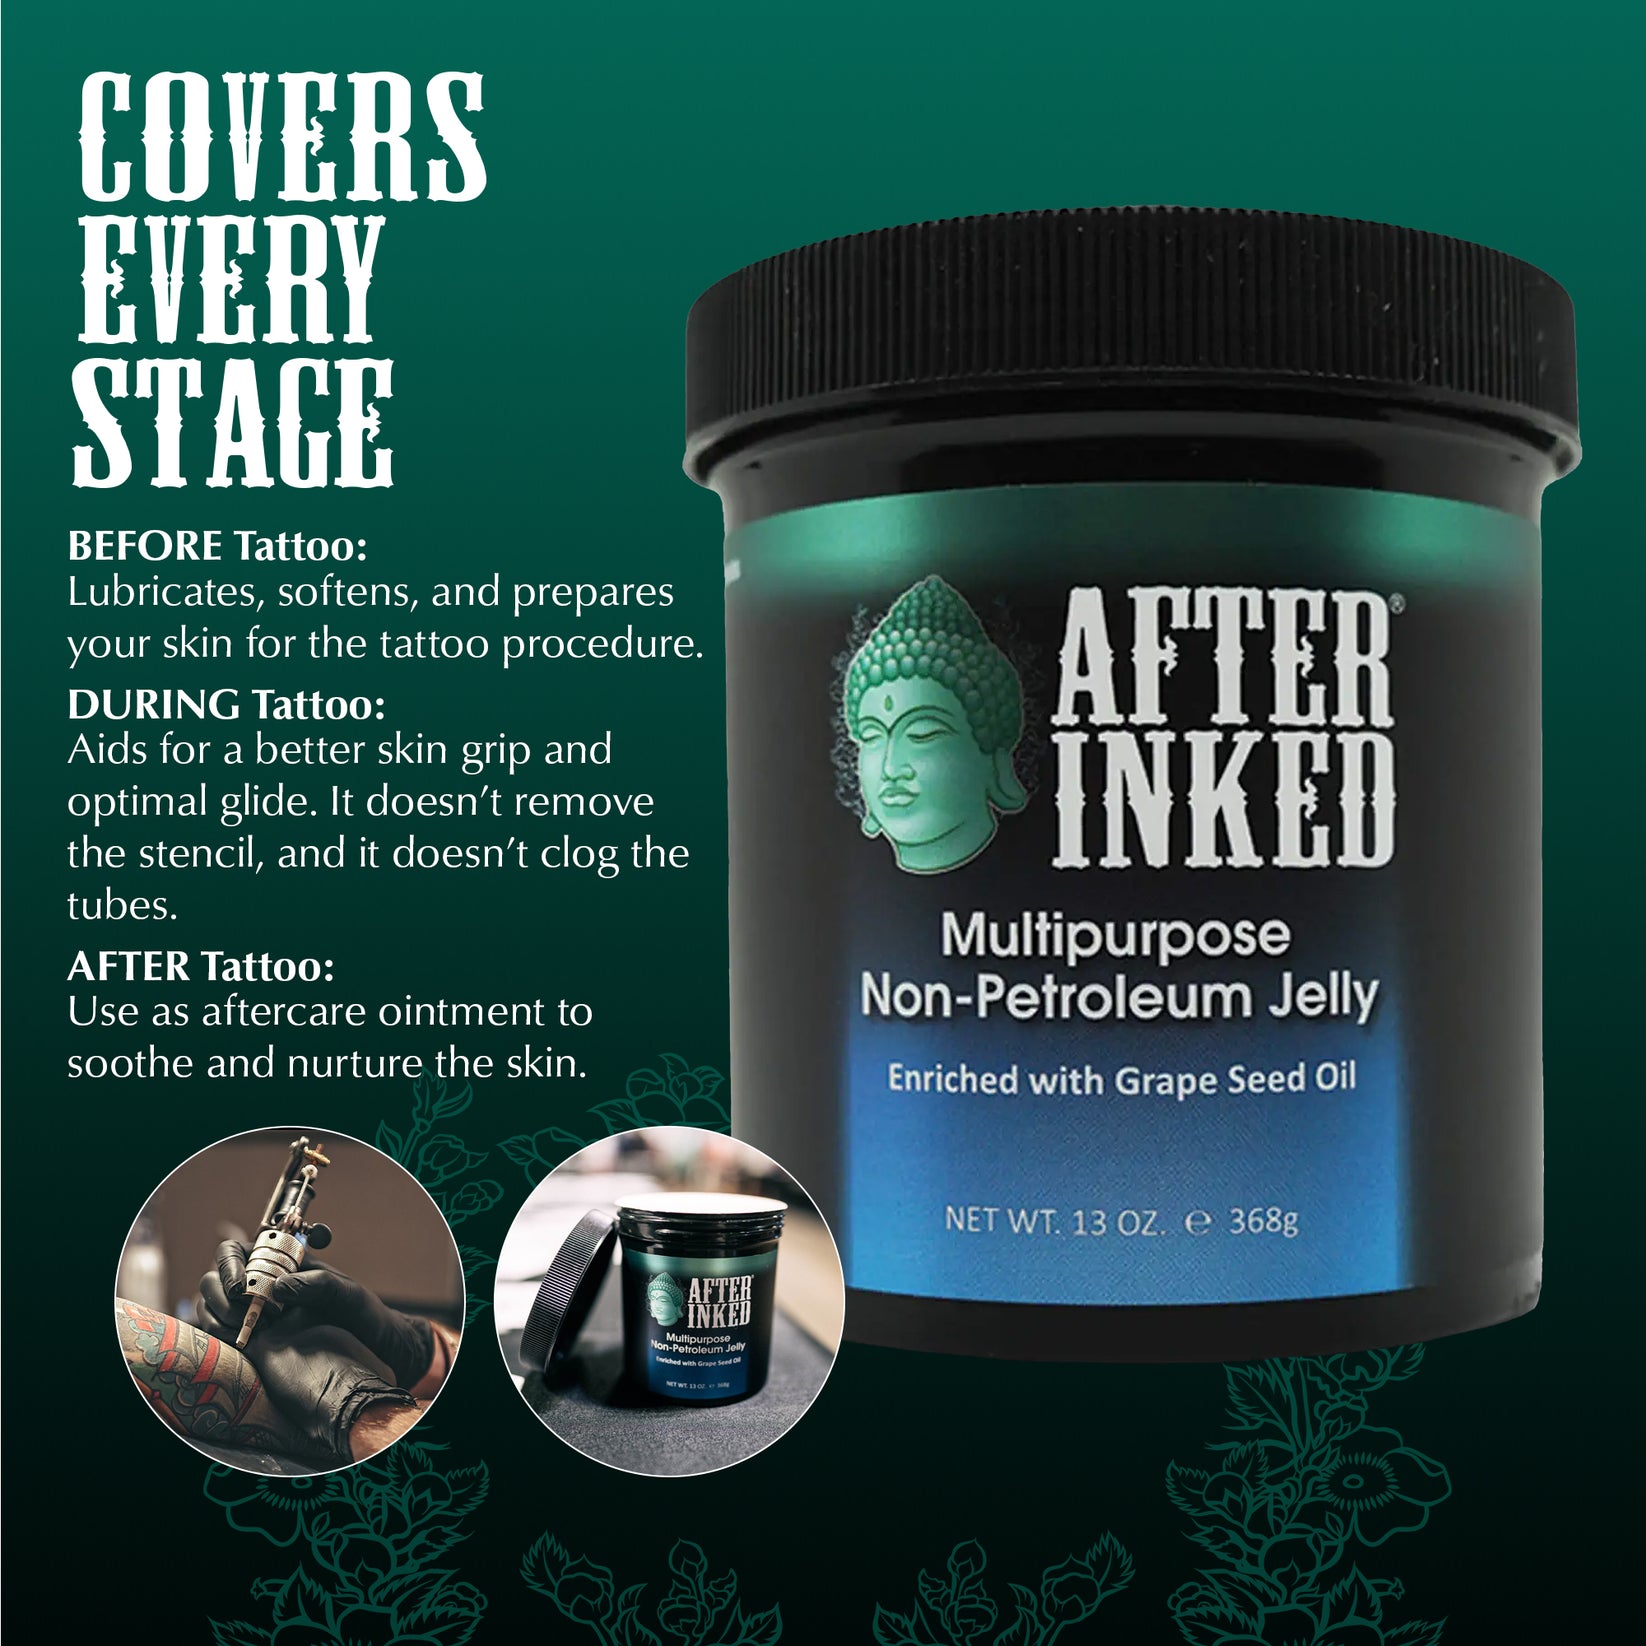 NPJ® Non-Petroleum Jelly by After Inked